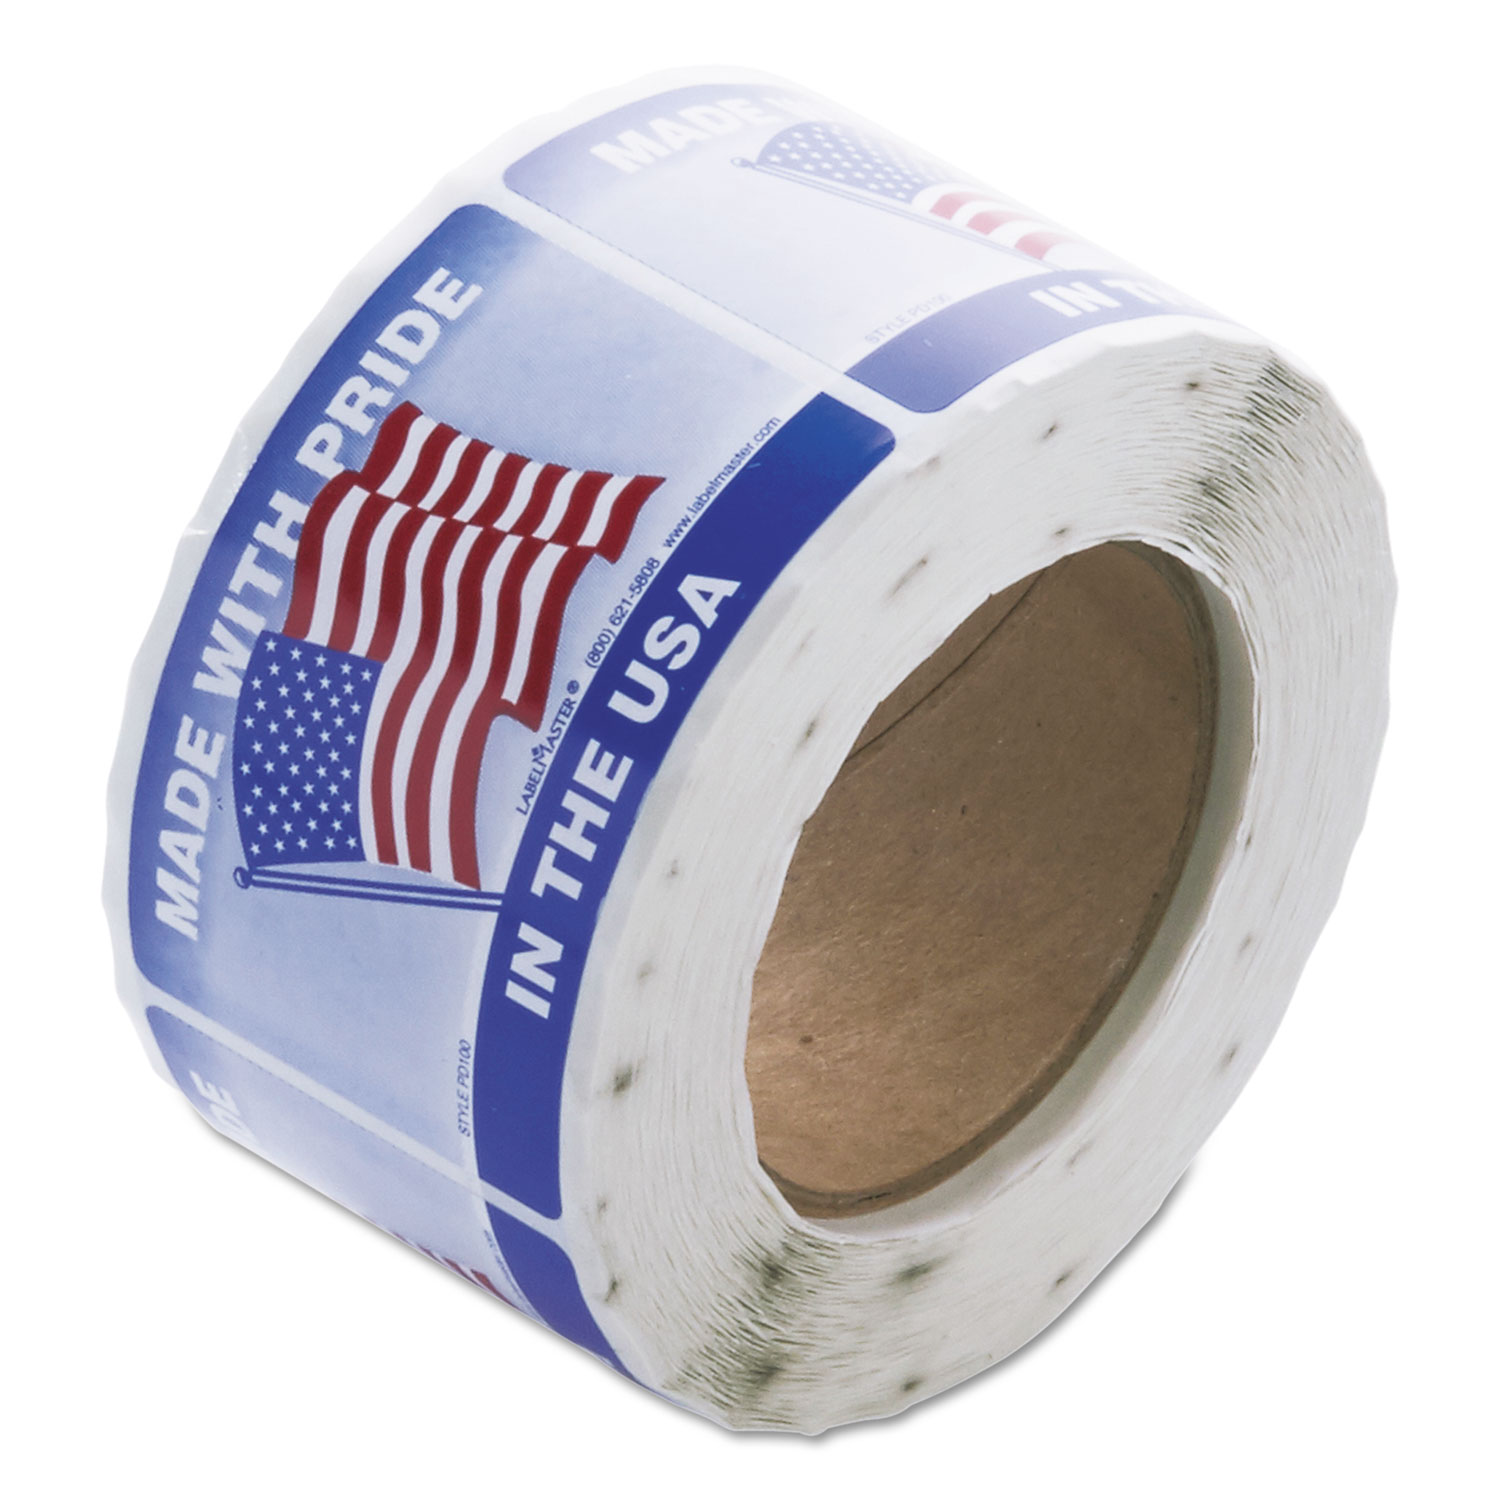 Warehouse Self-Adhesive Label, 5 1/4 x 3, MADE WITH PRIDE IN THE USA, 500/Roll